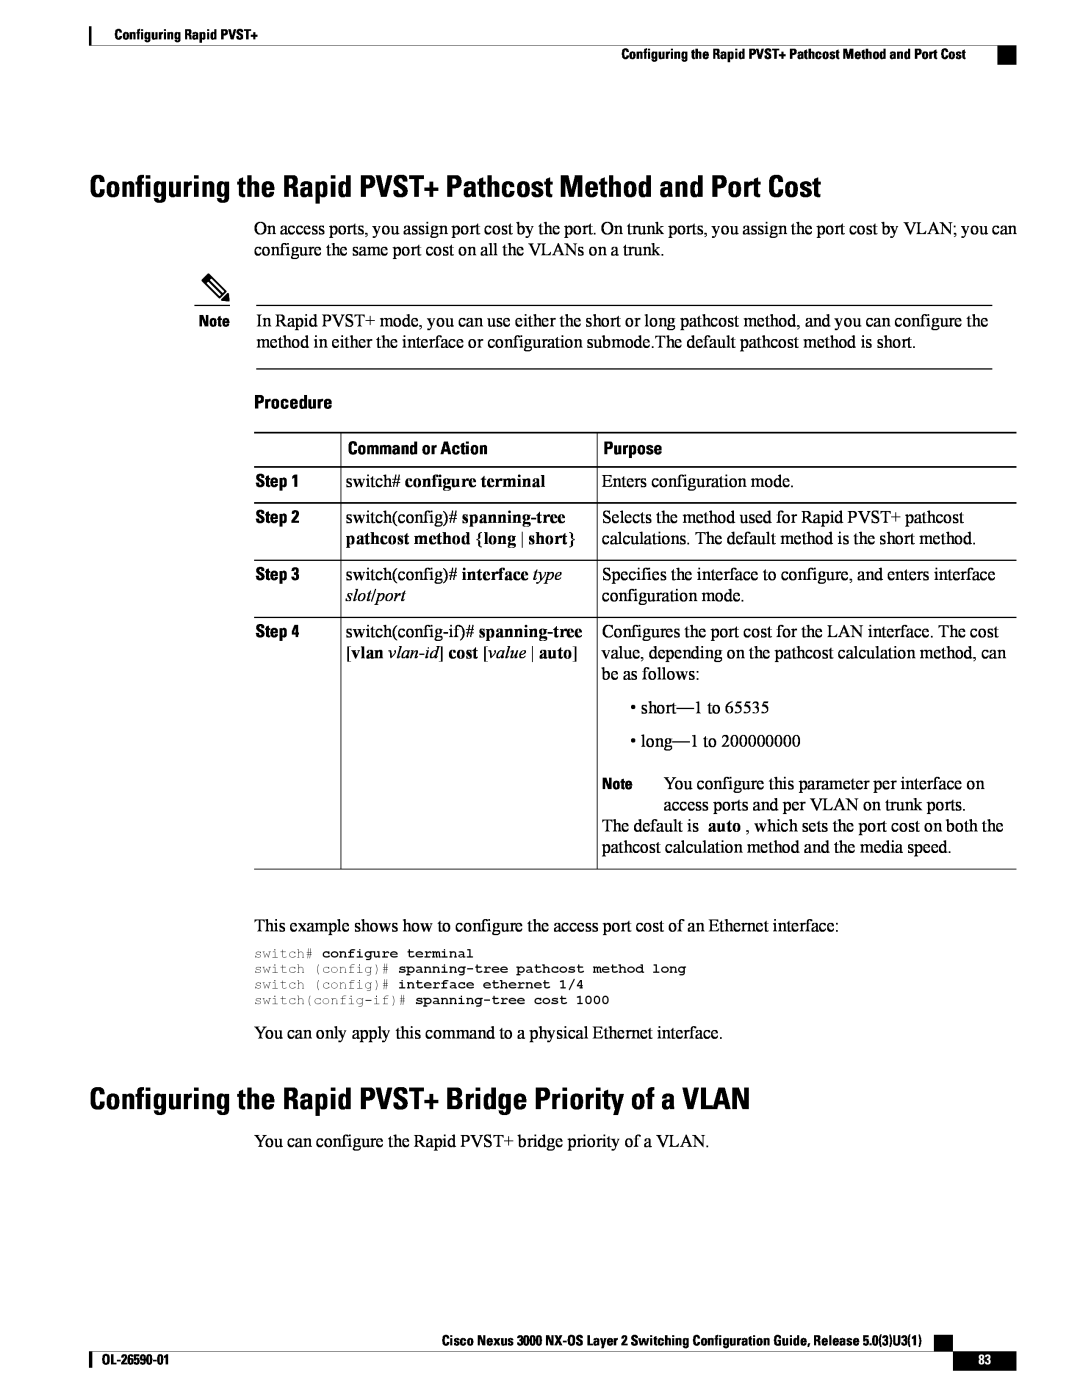 Cisco Systems N3KC3064TFAL3 Configuring the Rapid PVST+ Pathcost Method and Port Cost, pathcost method long short, Step 